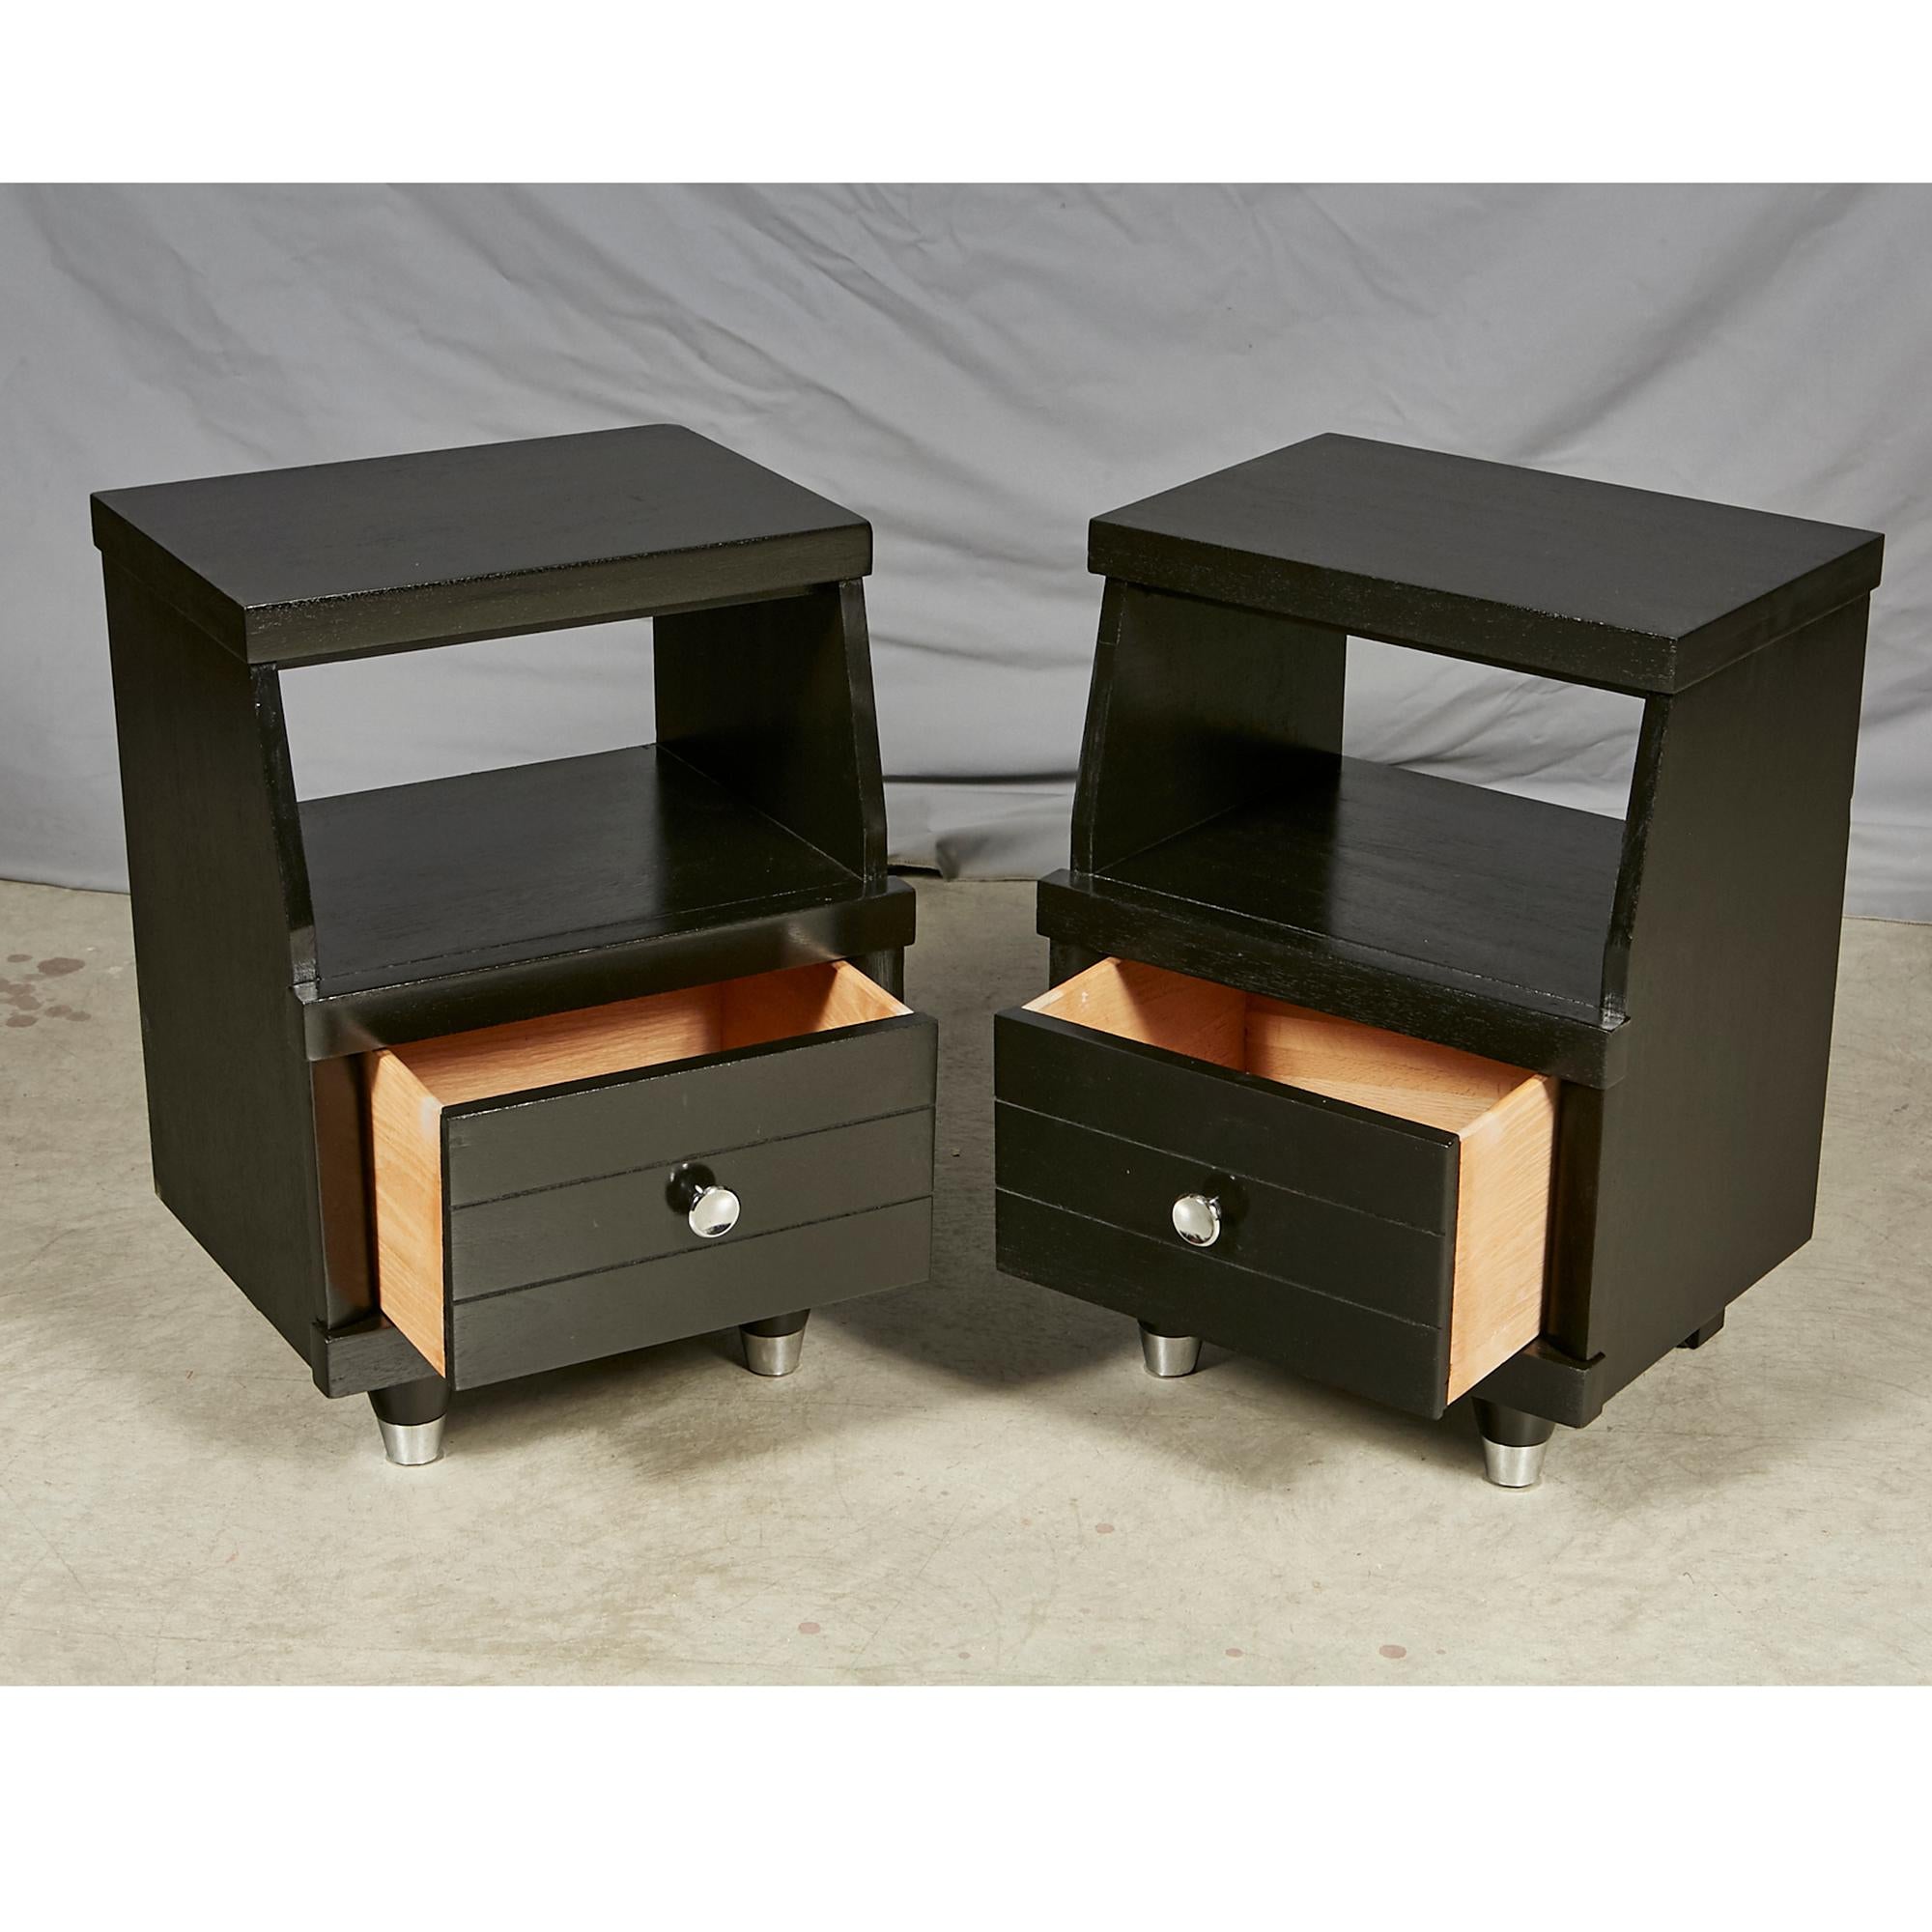 Chrome Mid-20th Century Modern Black Lacquered Nightstands, Pair For Sale